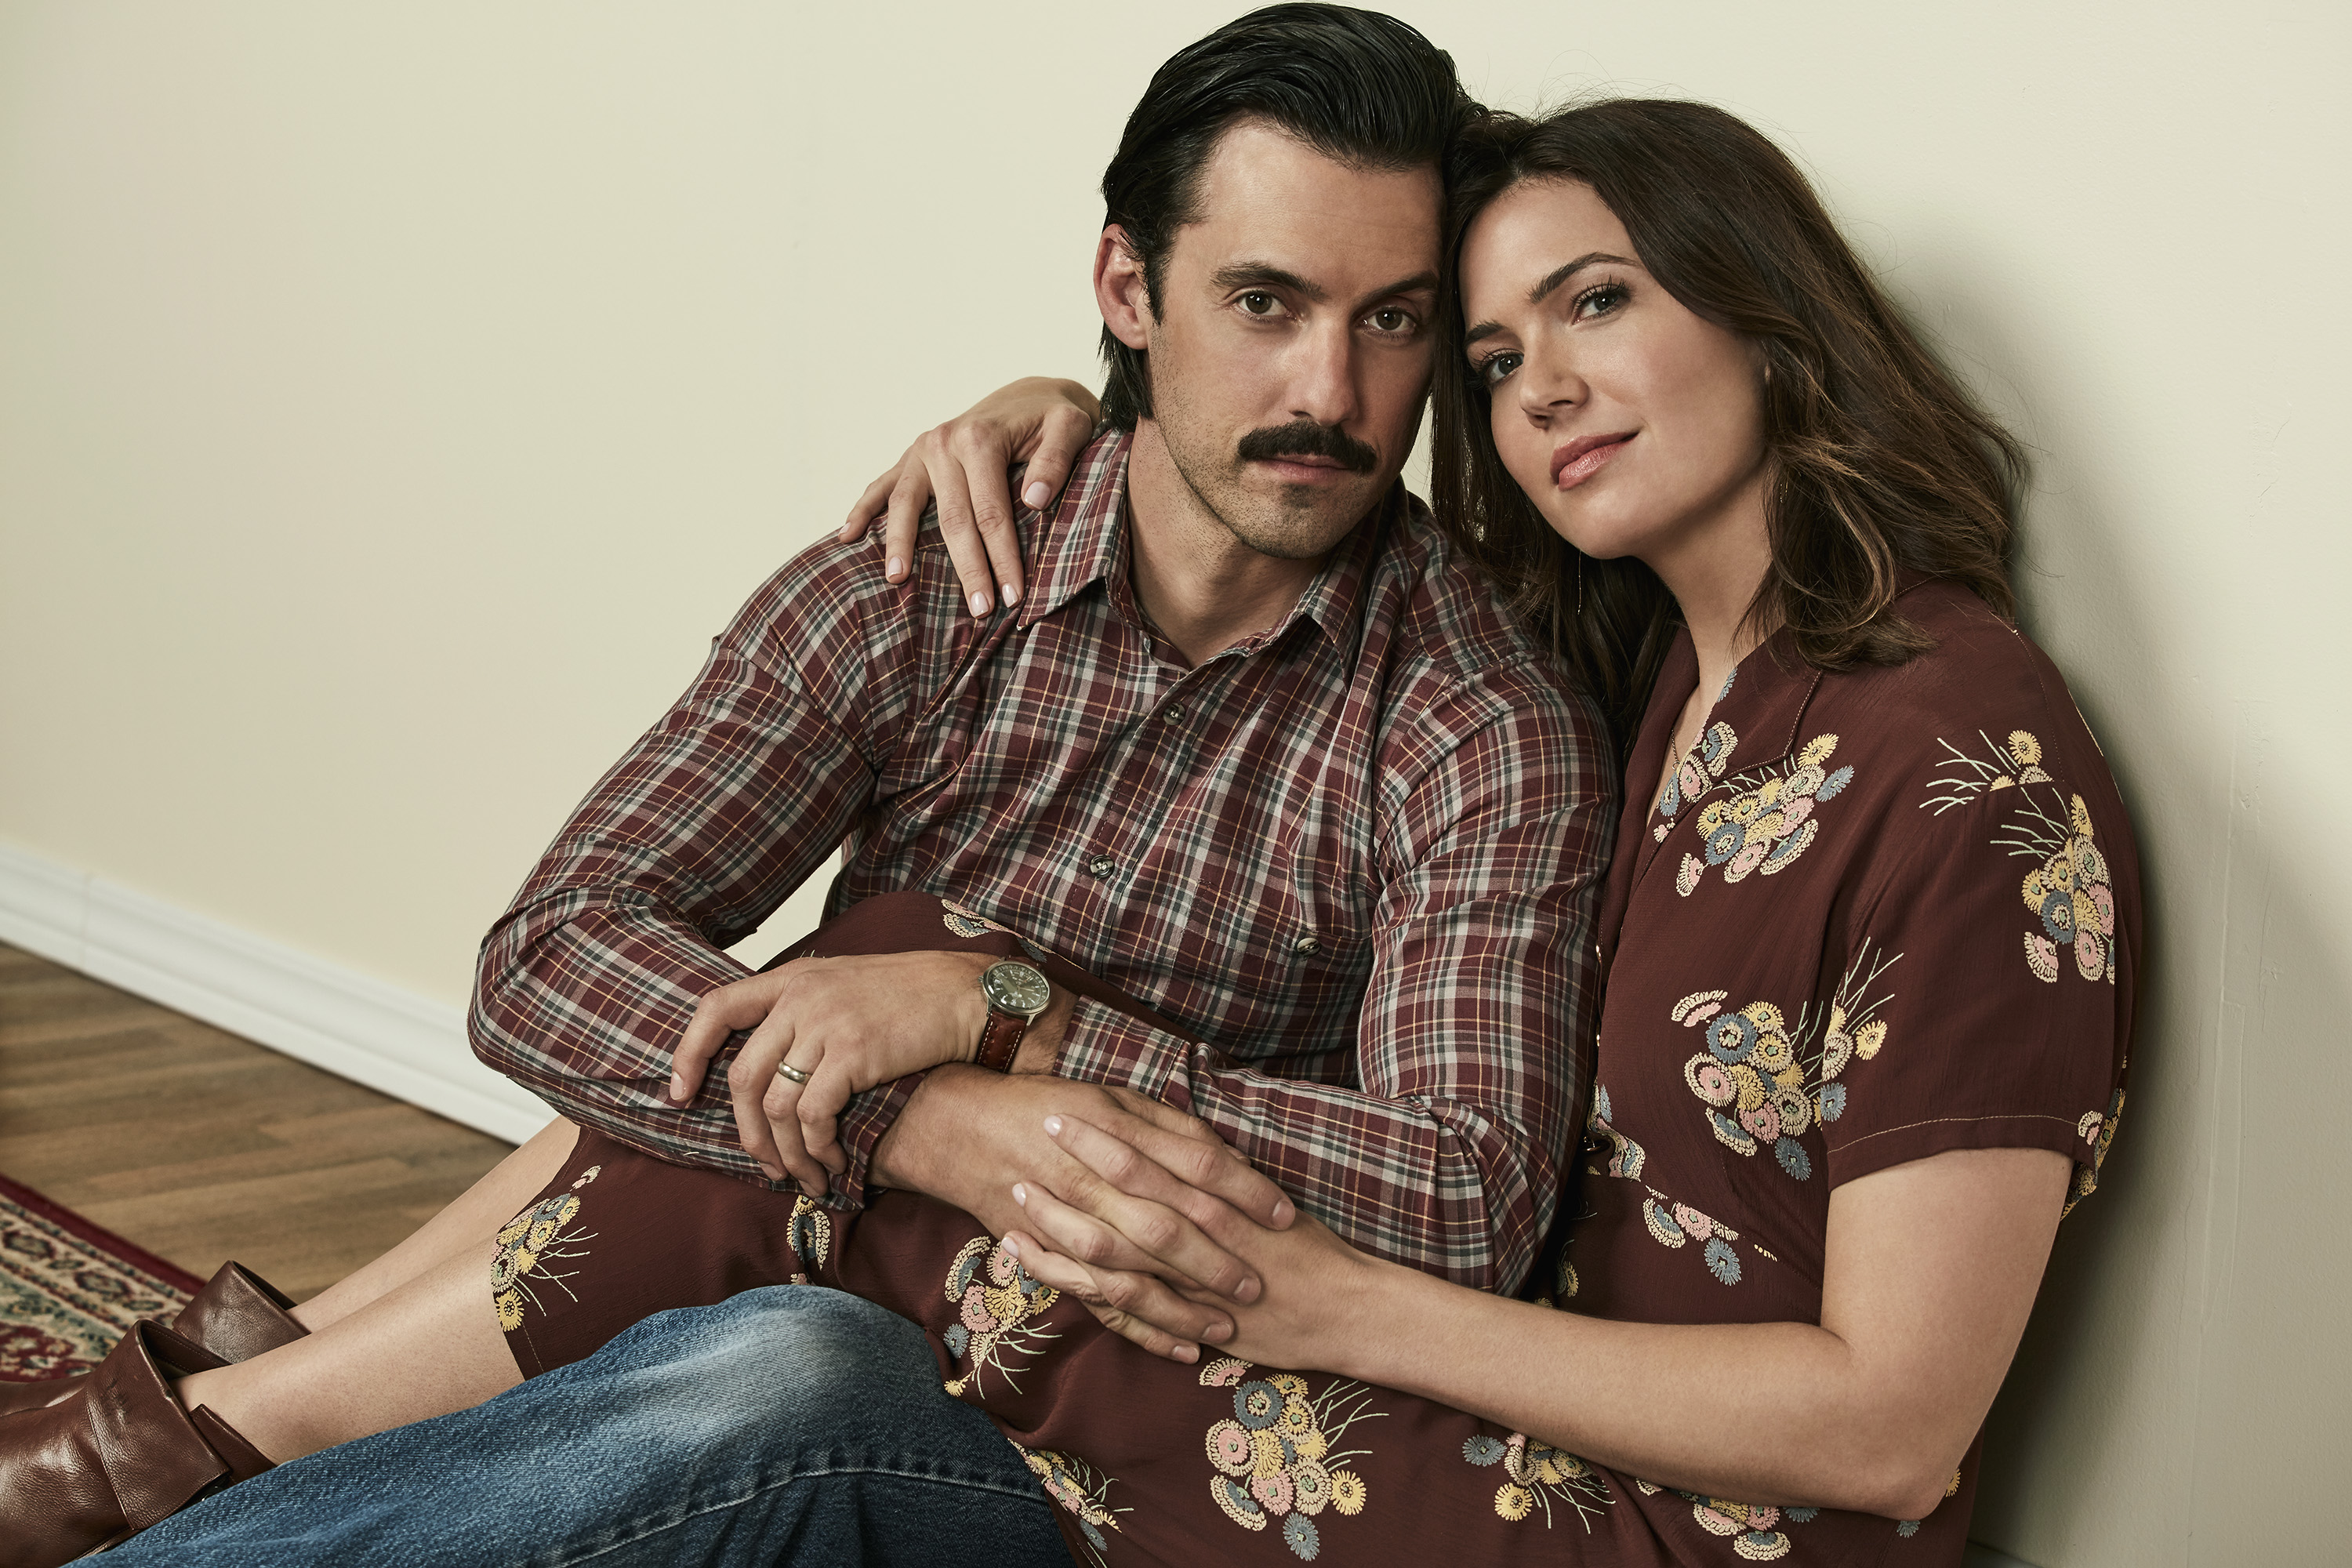 This Is Us finale stars Milo Ventimiglia and Mandy Moore sit next to each other on the floor and hold hands.